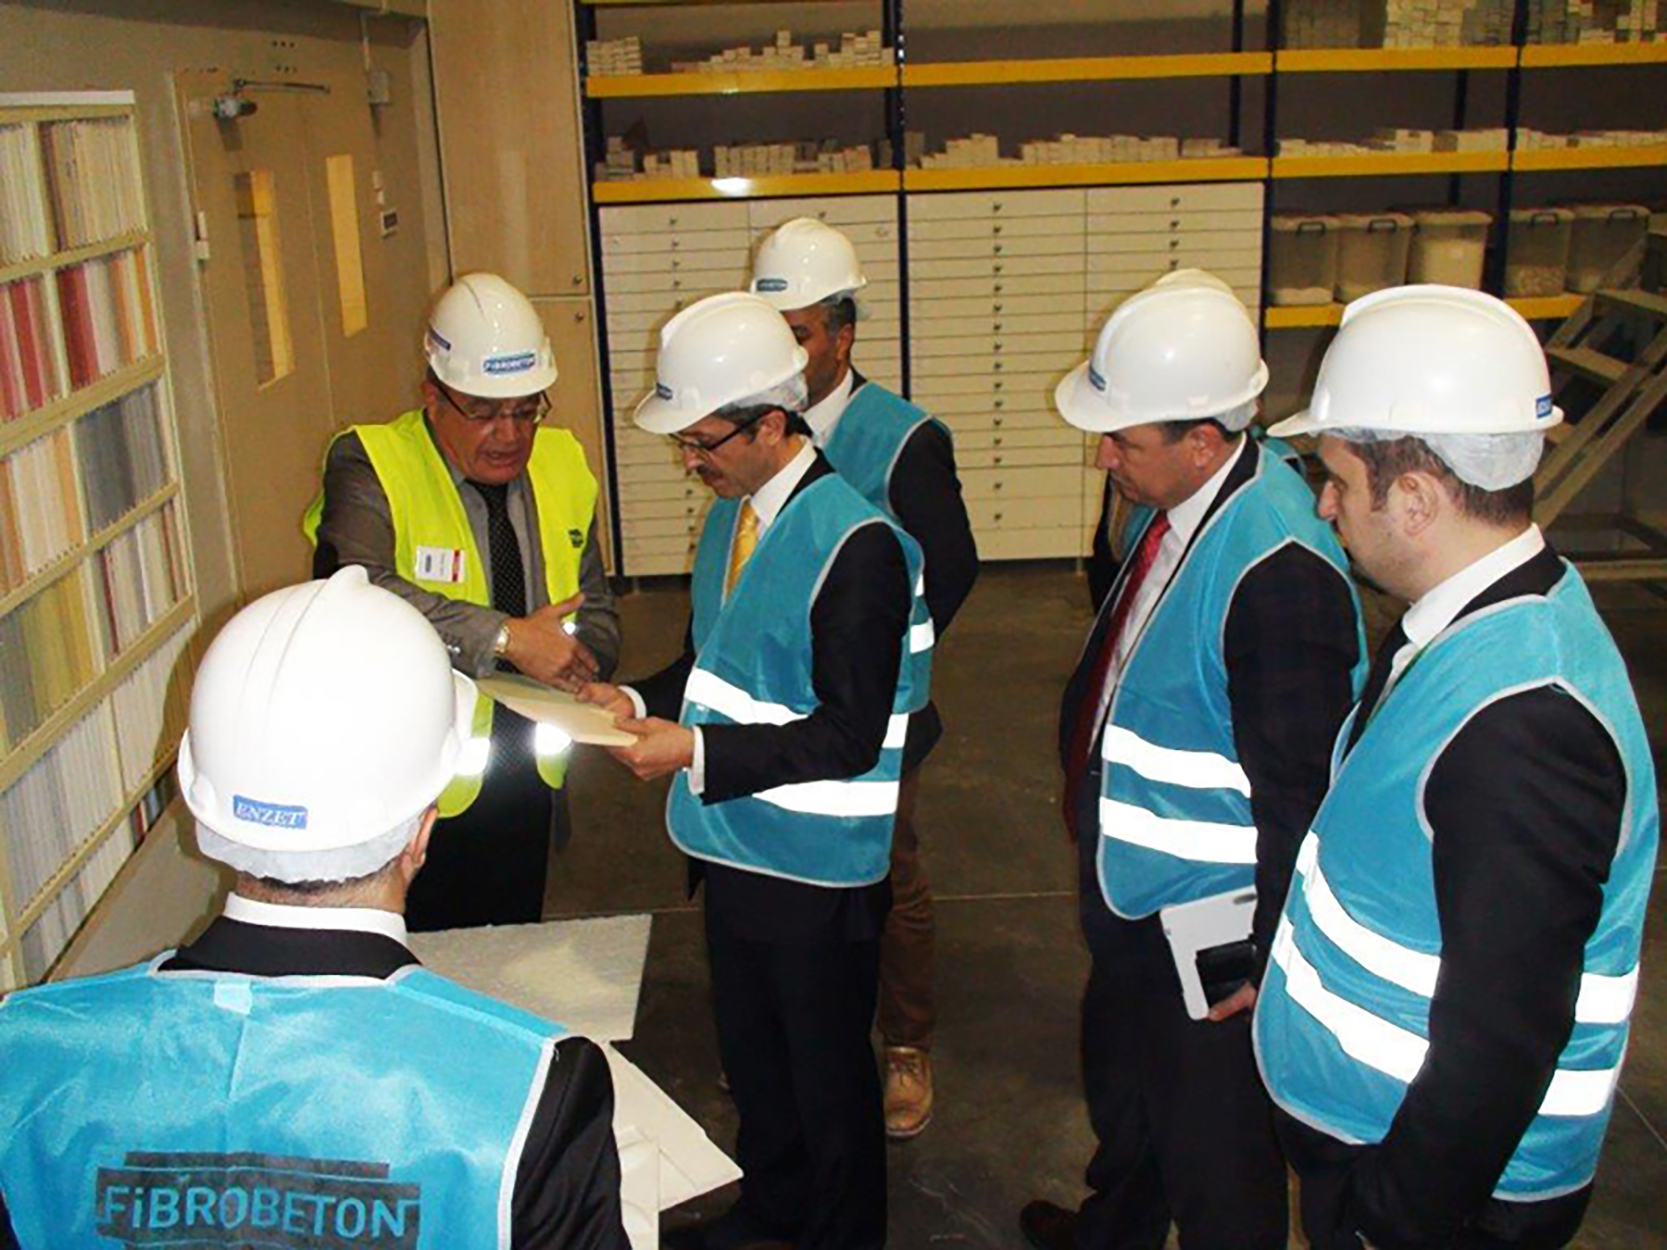 Fibrobeton Visit To Fibrobeton Duzce Plant From Ministry Of Science, Industry And Technology Delegation